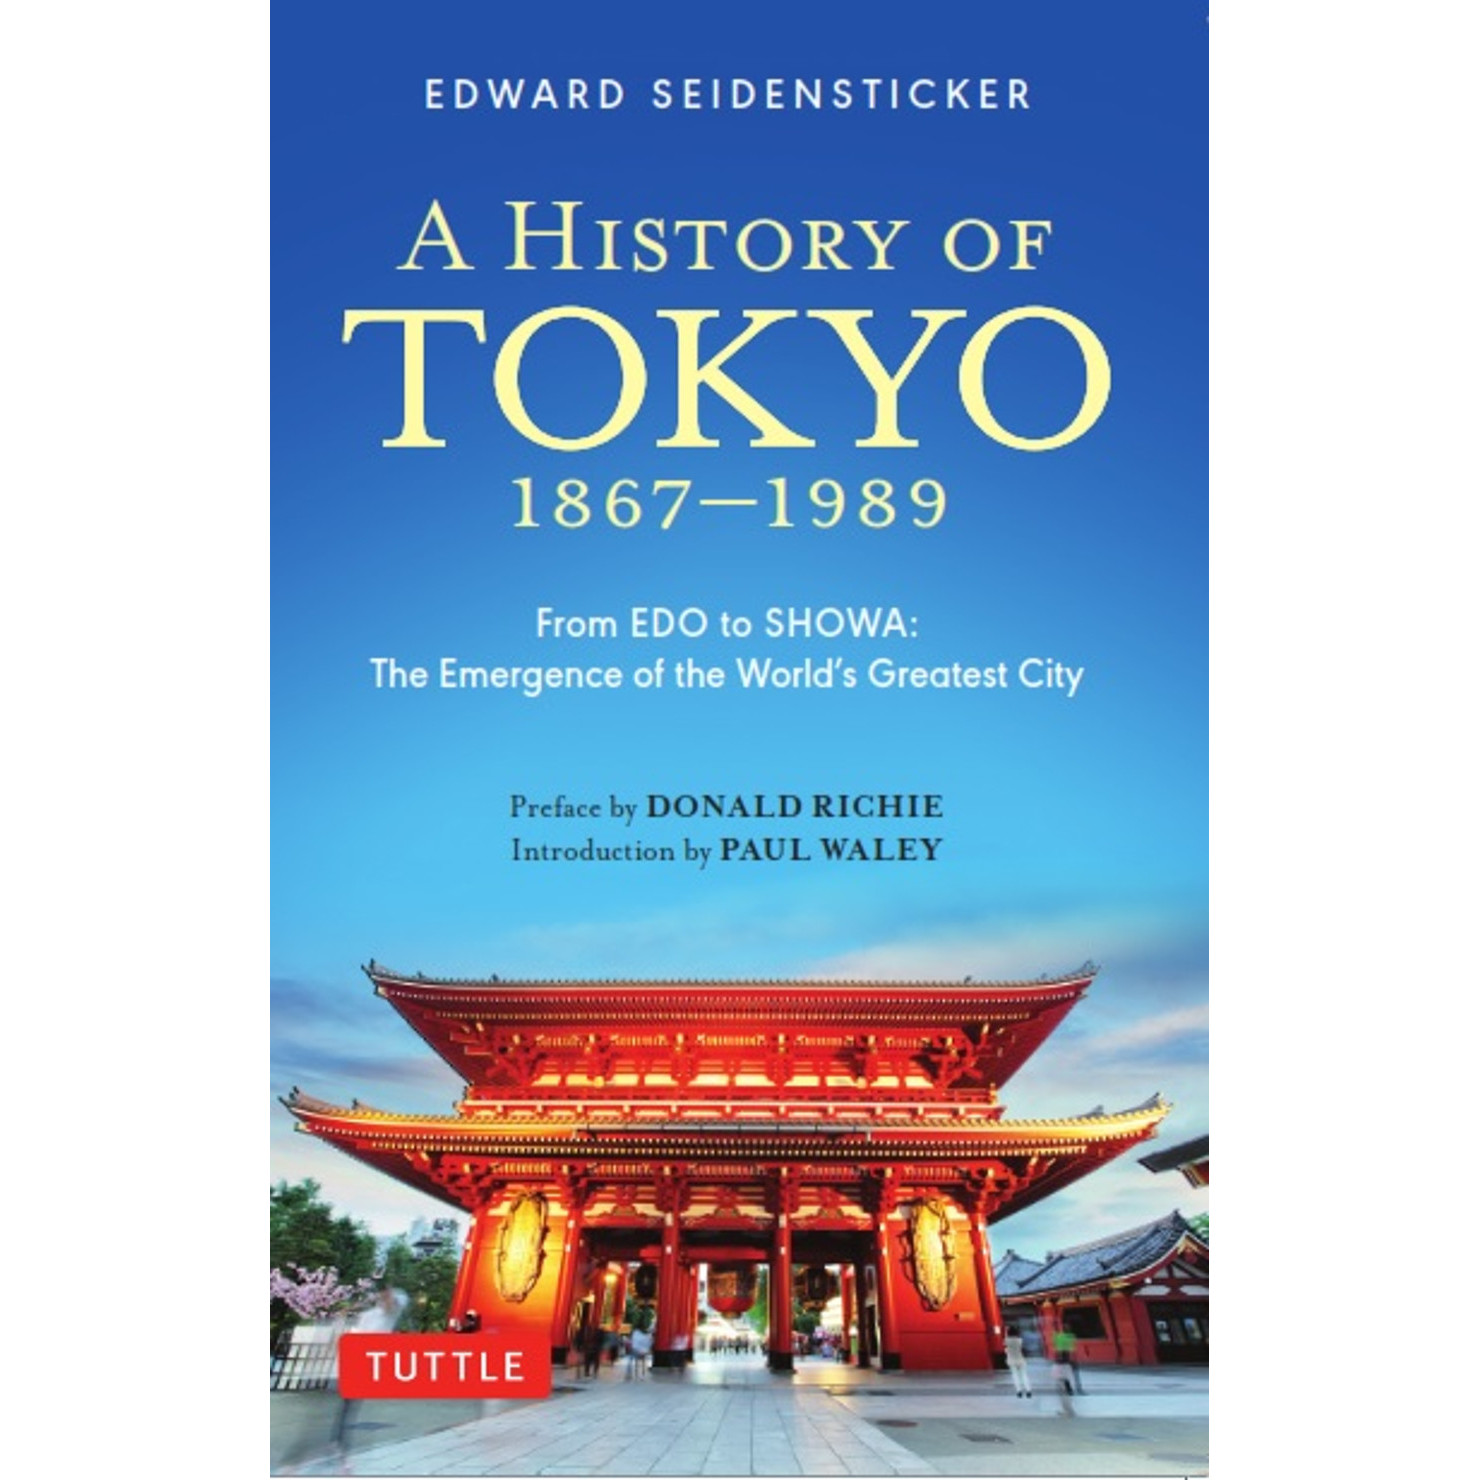 A History of Tokyo 1867-1989 (9784805315118)